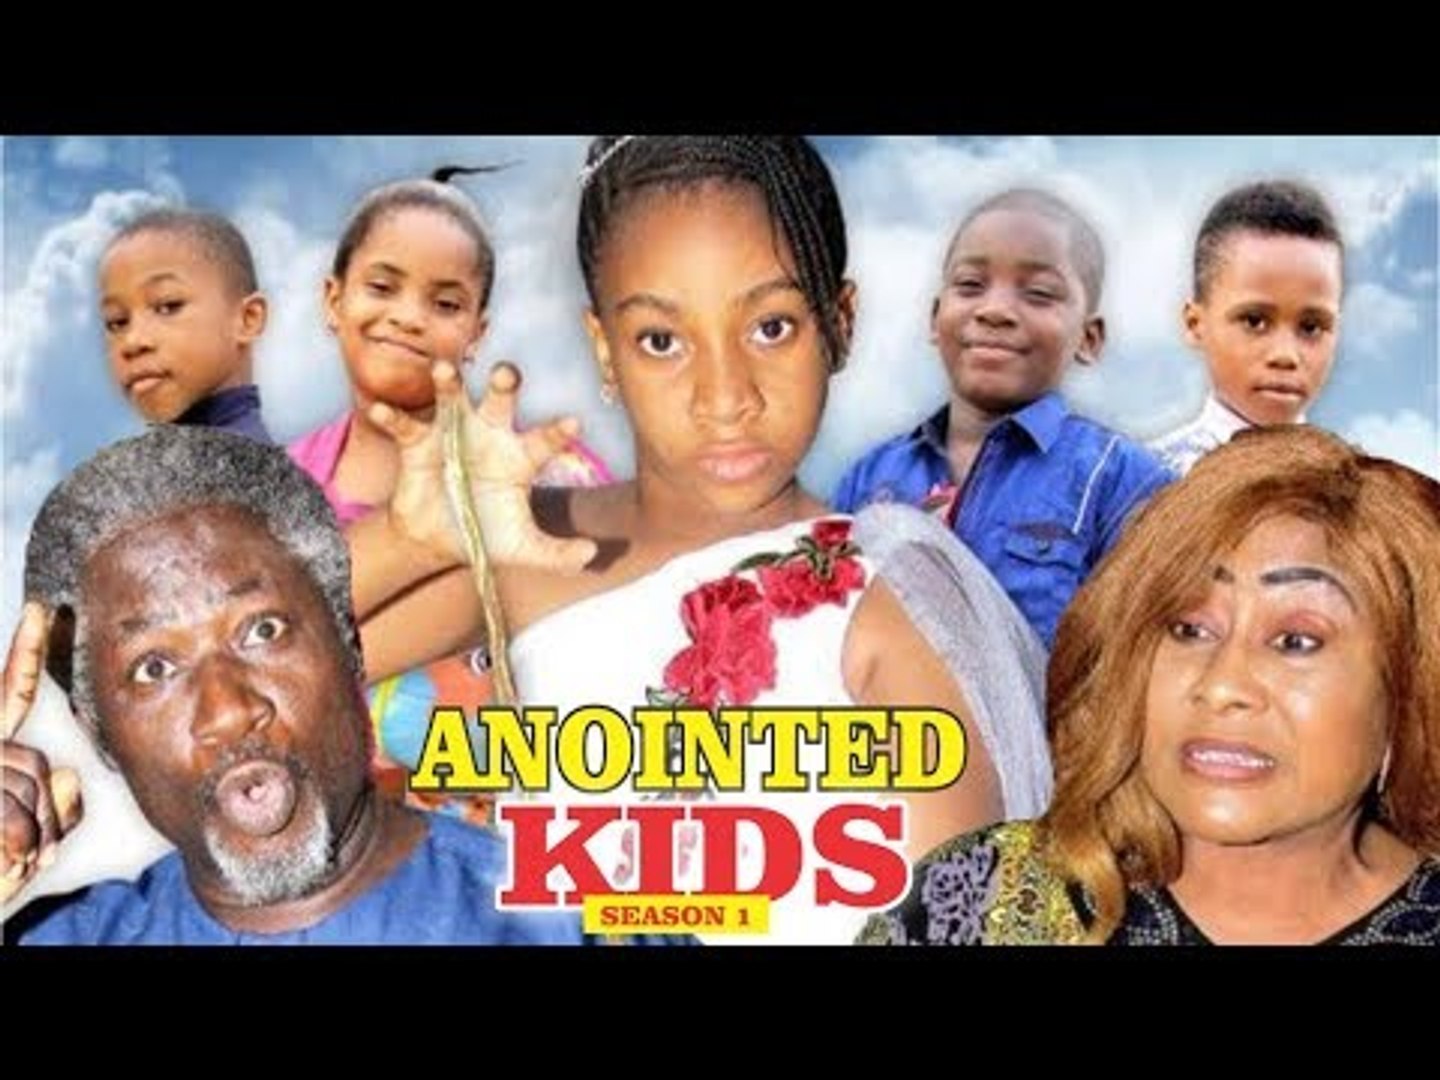 ANOINTED KIDS 1 - 2018 LATEST NIGERIAN NOLLYWOOD MOVIES || TRENDING NOLLYWOOD MOVIES